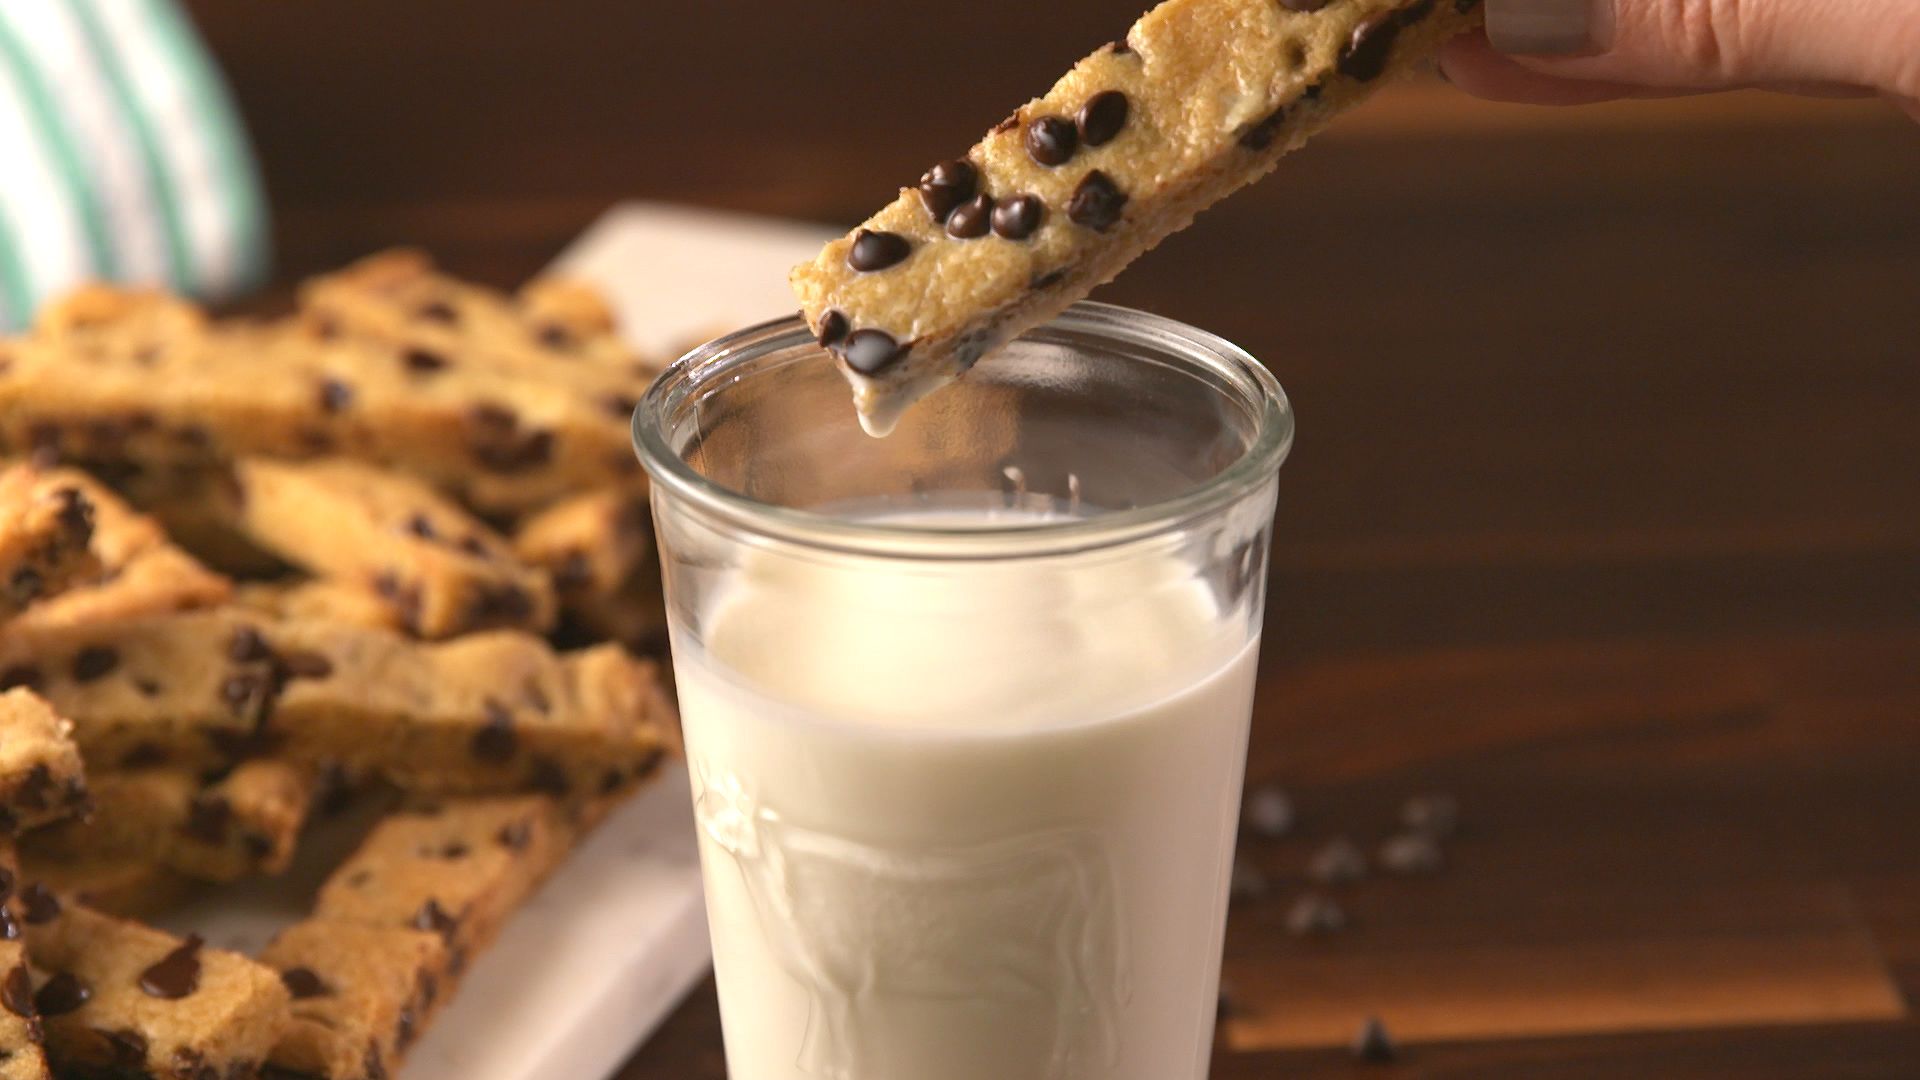 Best Chocolate Chip Cookie Dippers Recipe - How to Make Chocolate